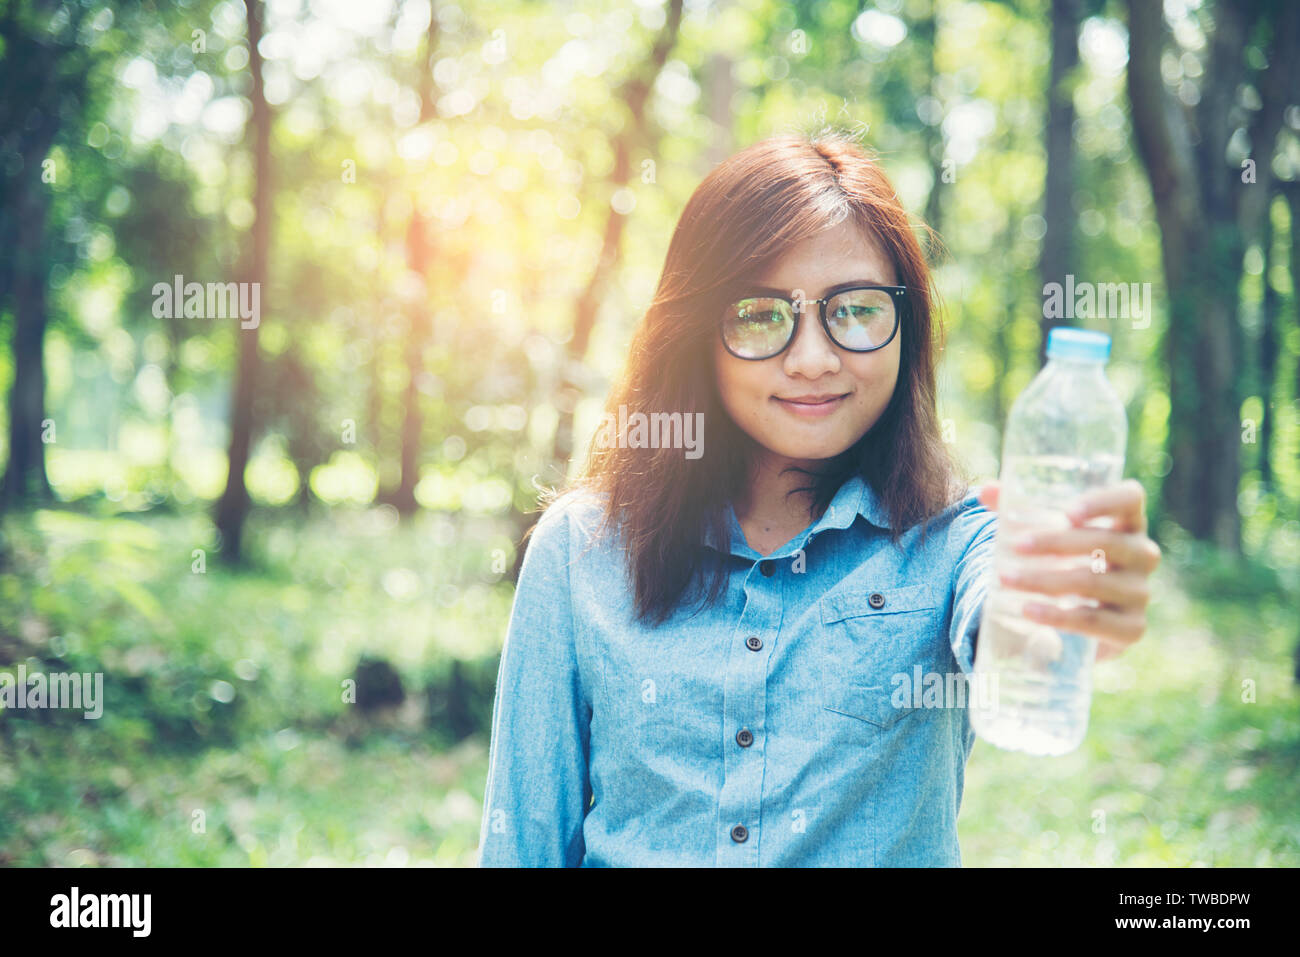 https://c8.alamy.com/comp/TWBDPW/beautiful-girl-drinks-water-from-a-bottle-on-the-nature-TWBDPW.jpg